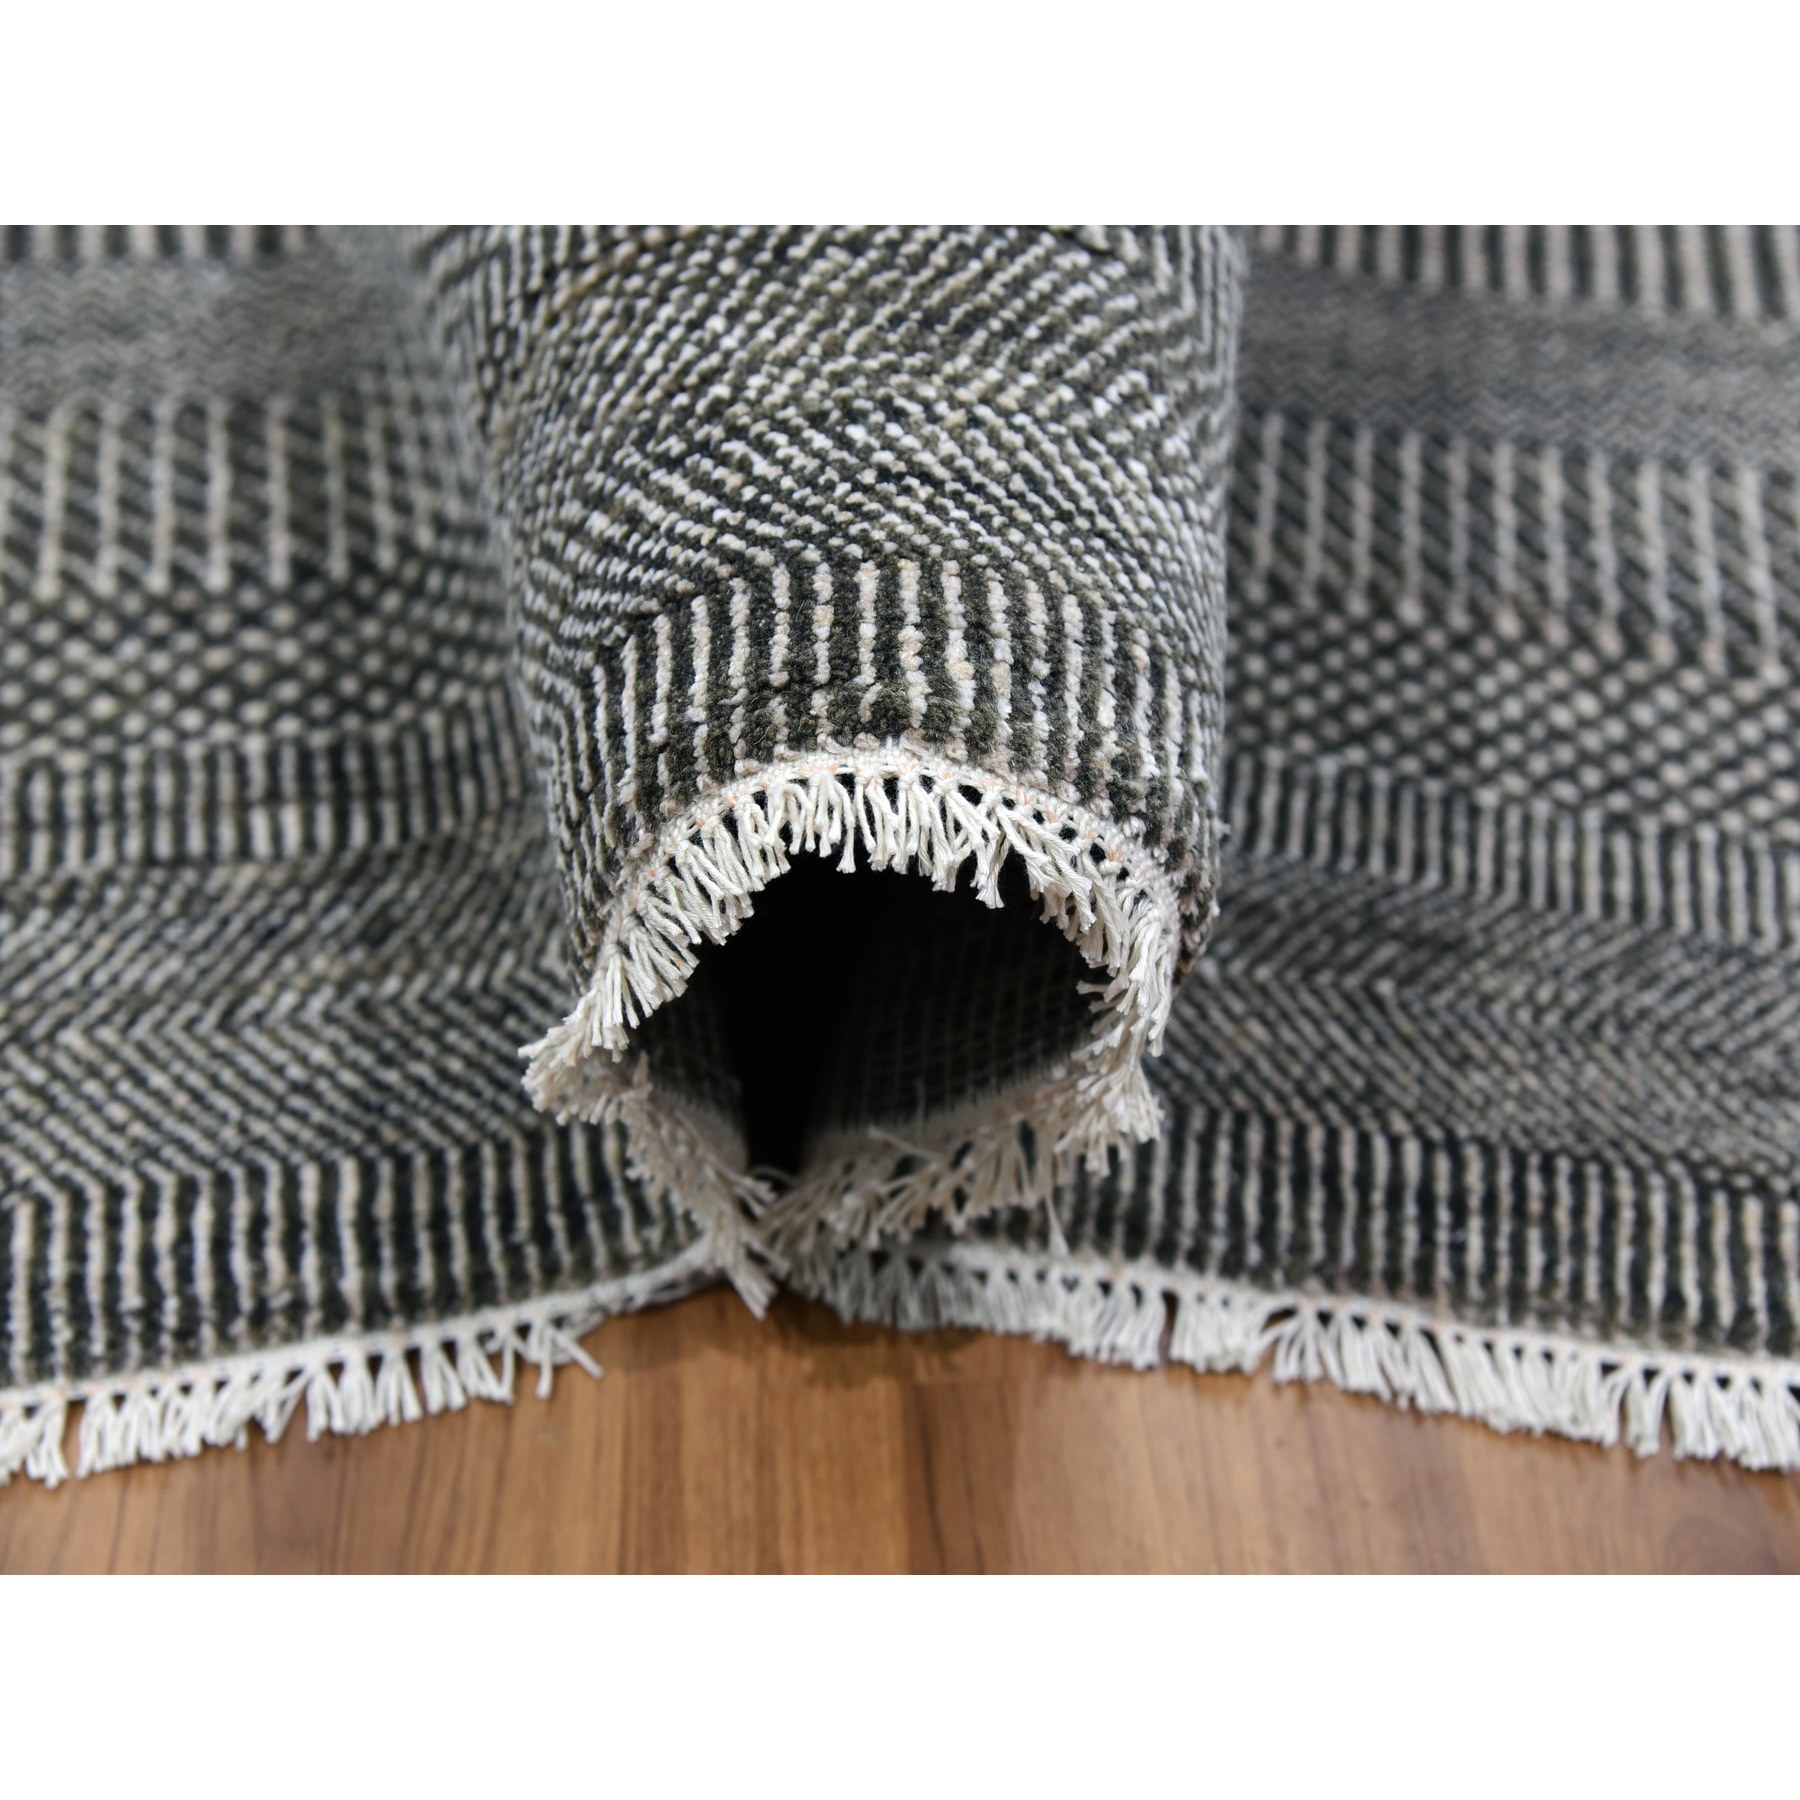 8'1"x10'3" Davy's Gray, Dyed Densely Woven Tone on Tone, Soft to the Touch Wool and Silk, Hand Woven Modern Grass Design, Oriental Rug 